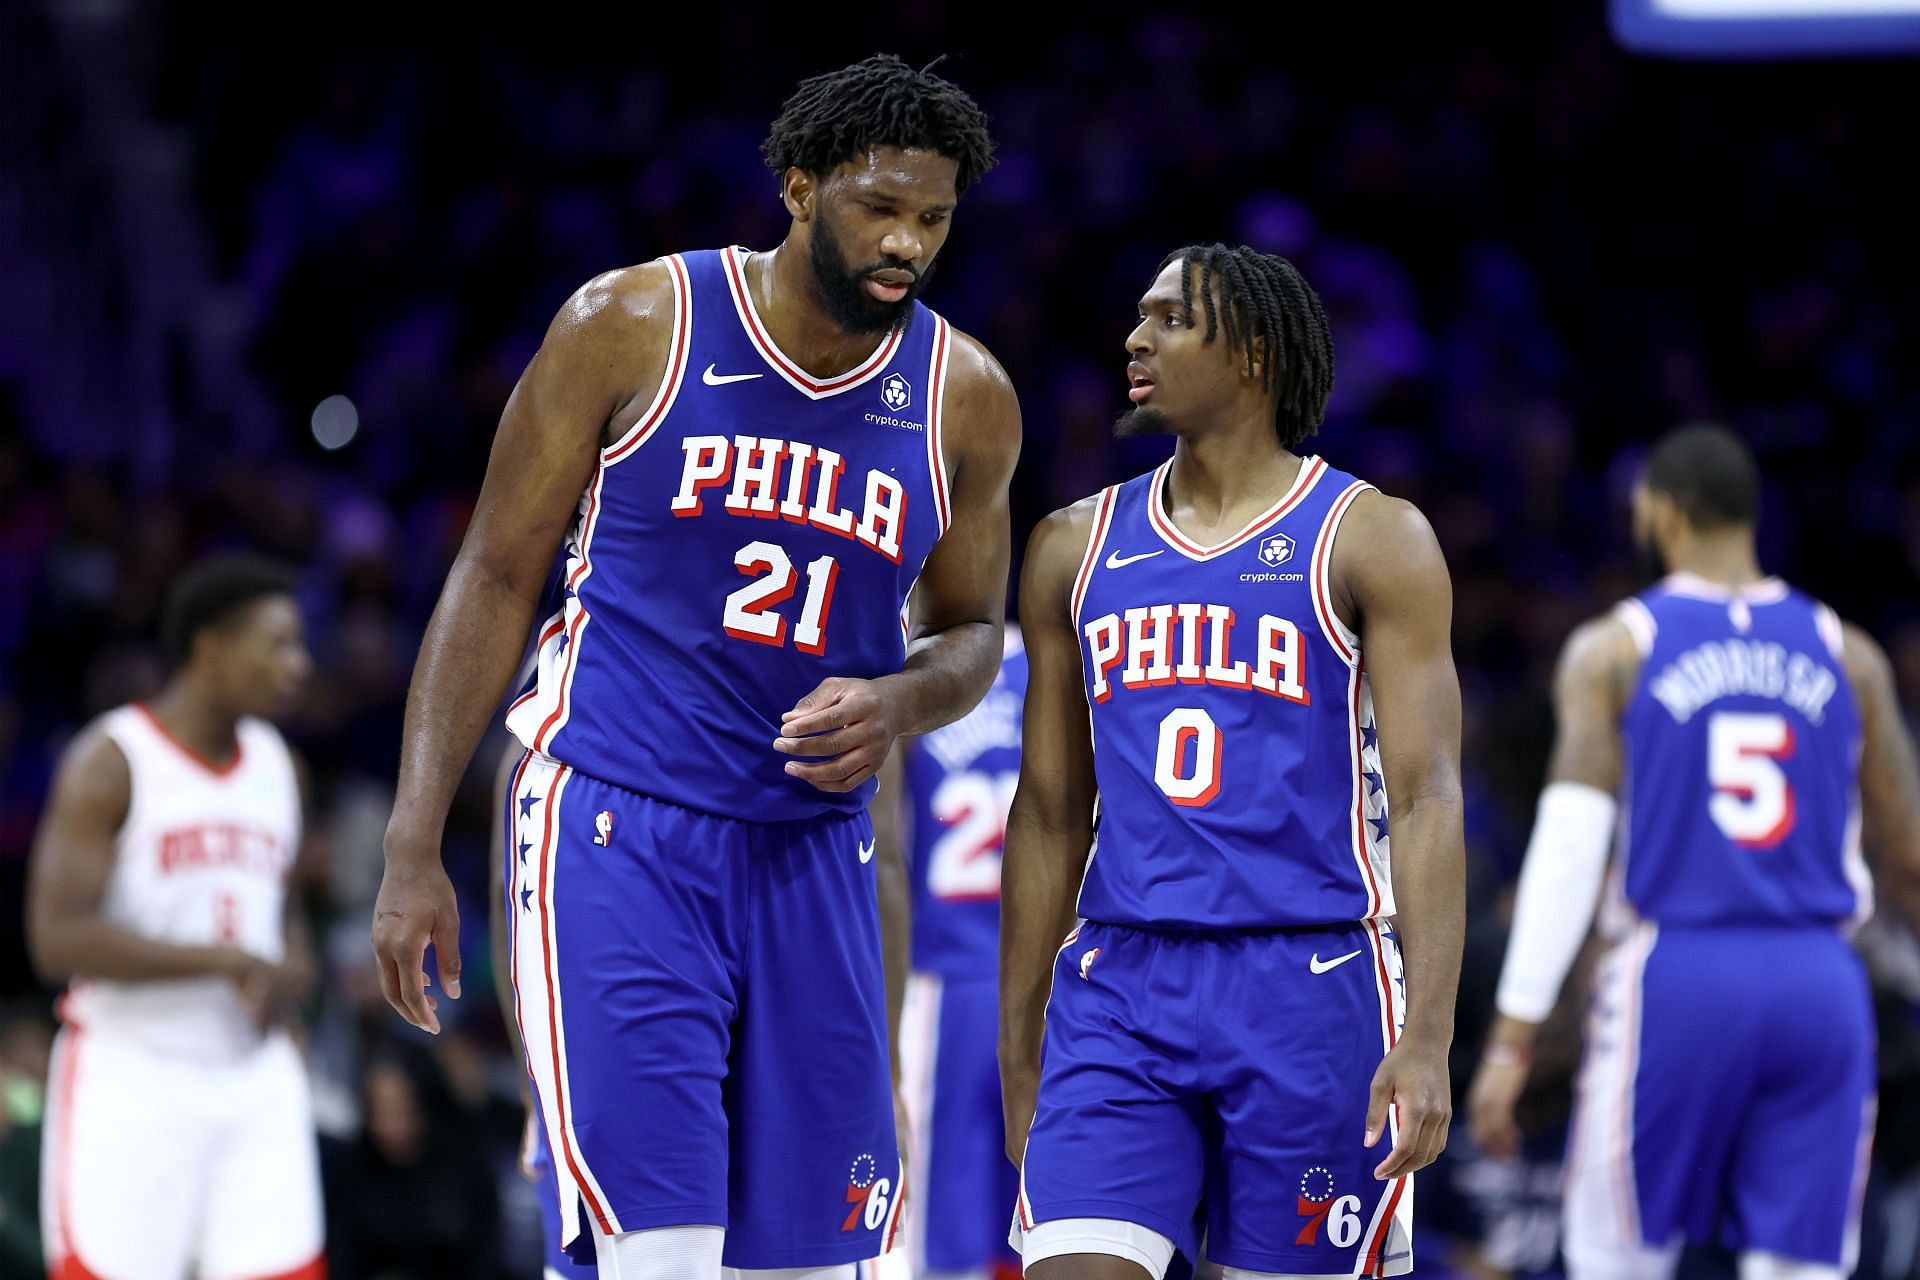 Philadelphia 76ers center Joel Embiid and guard - Tyrese Maxey